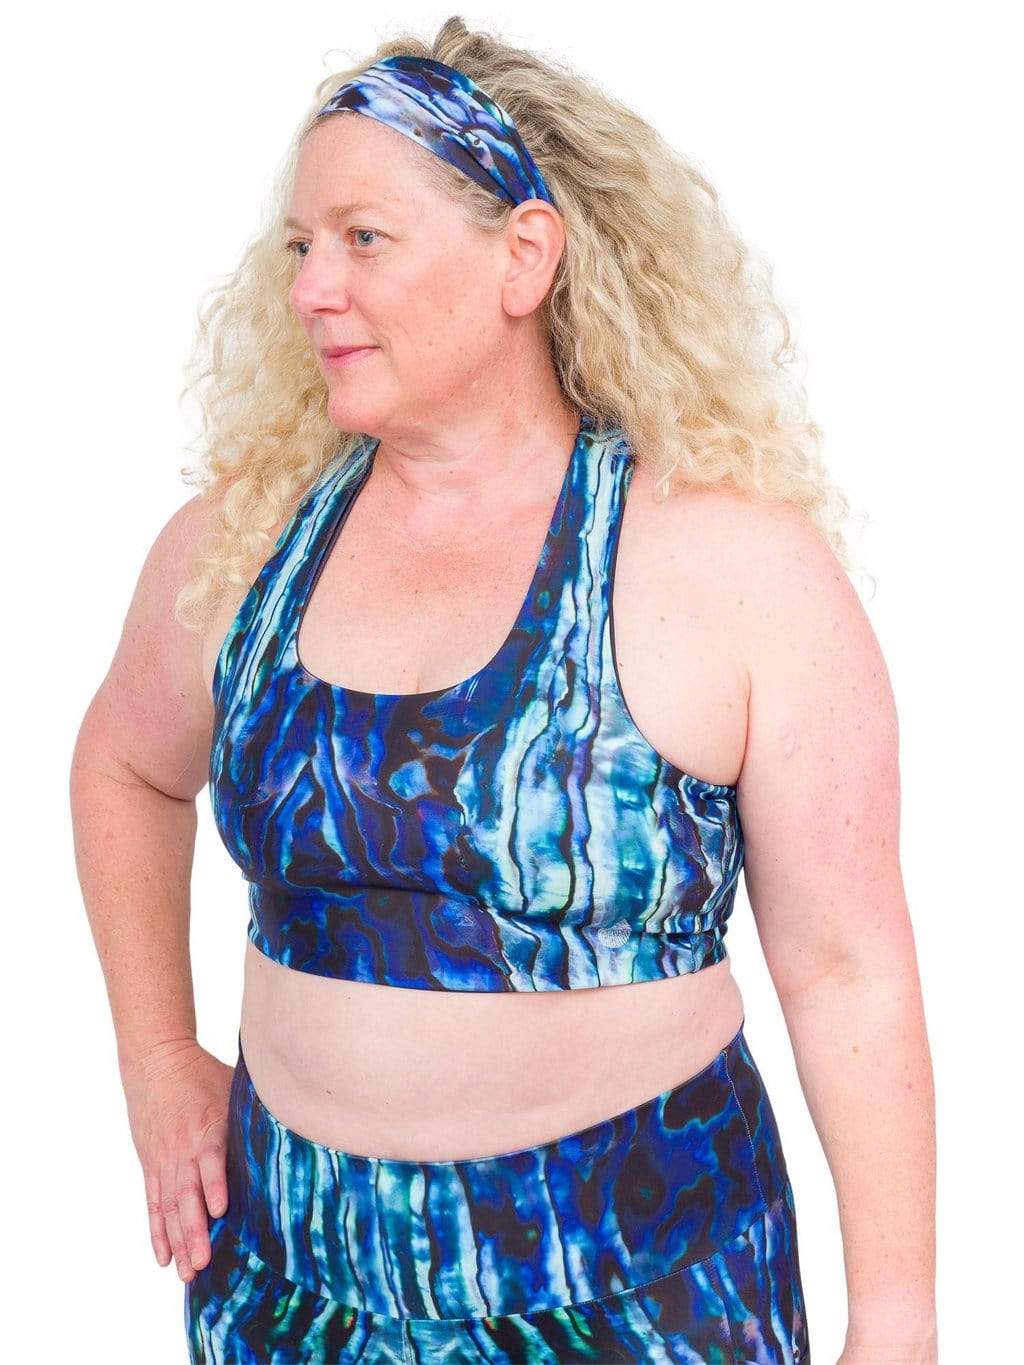 Model: Ruth volunteers for citizen science projects on both salt and freshwater fish and spends as much time as possible in, on, or under the water. She is 5&#39;7&quot;, 217 lbs, 40DD and is wearing a 2XL top and legging.